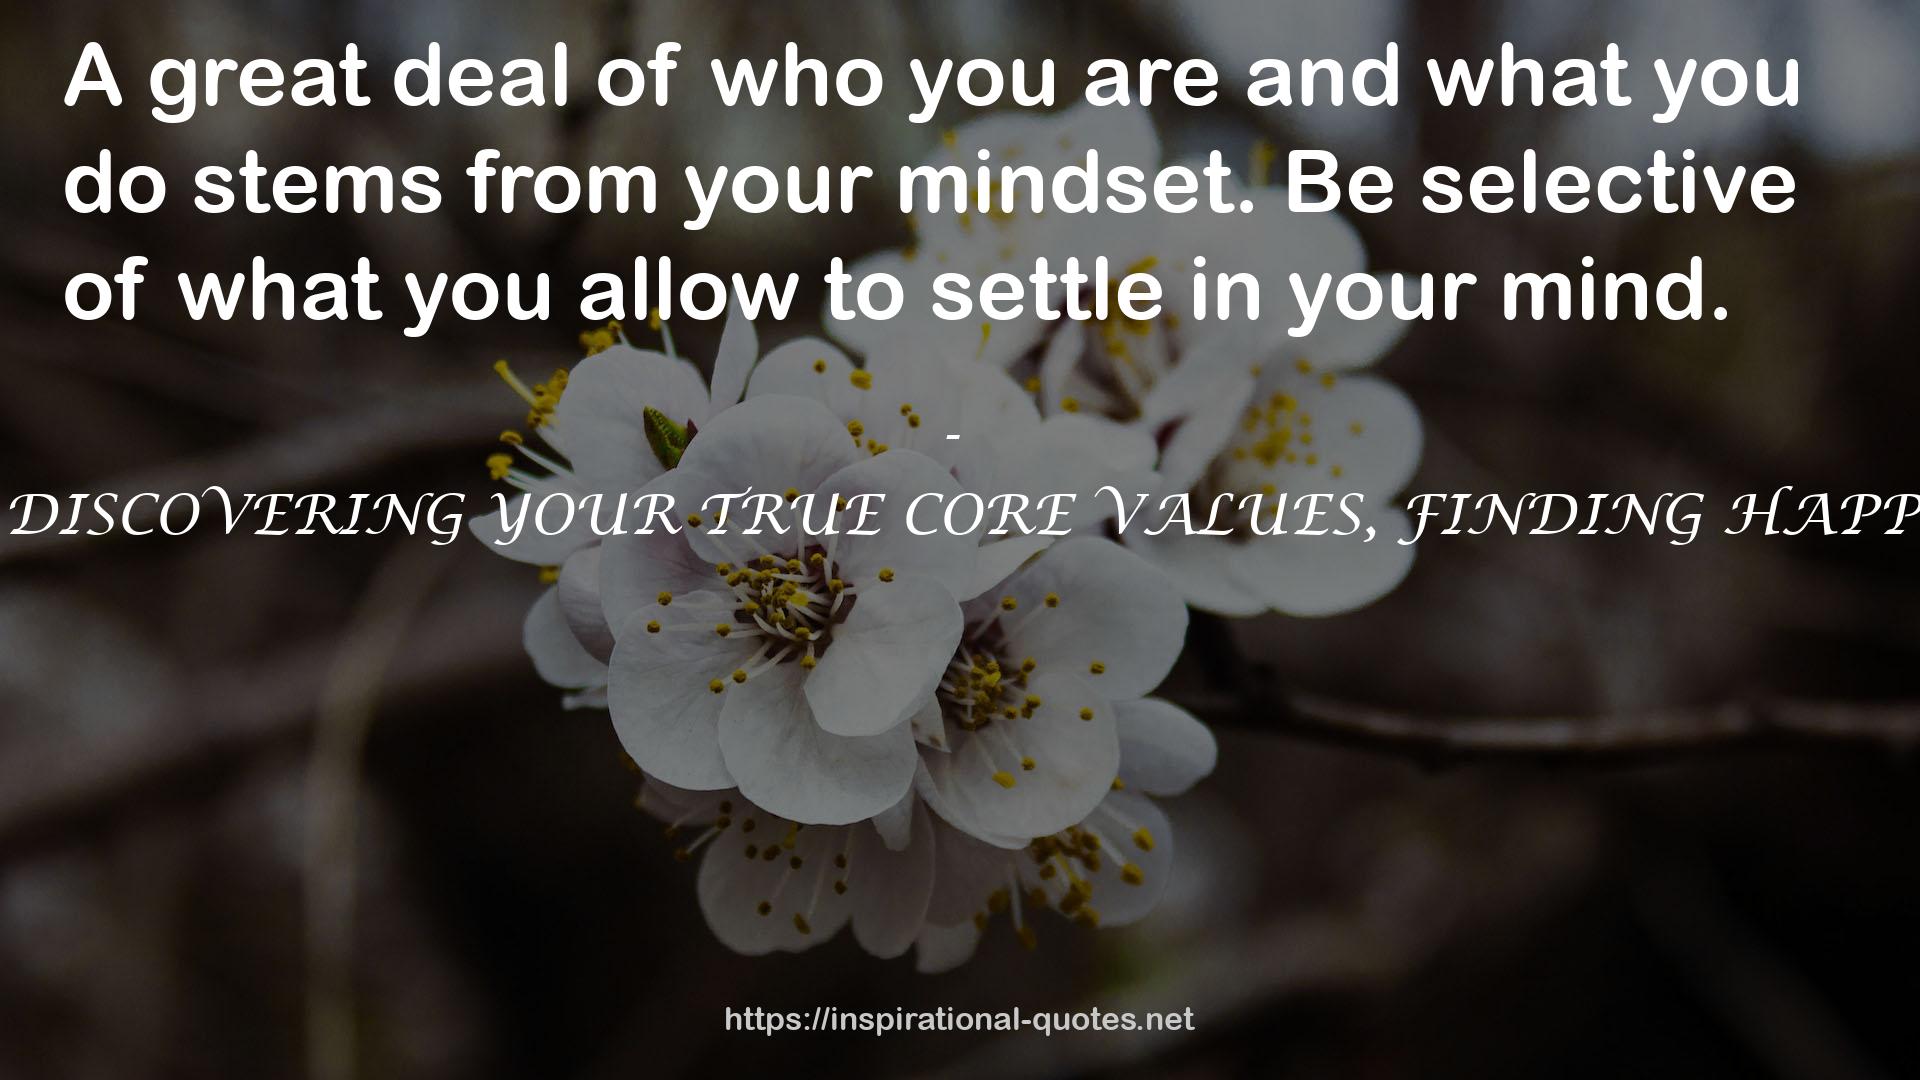 THE ROAD TO VALUE: POWERFUL METHODS FOR DISCOVERING YOUR TRUE CORE VALUES, FINDING HAPPINESS AND ENJOYING A PURPOSE – DRIVEN LIFE QUOTES